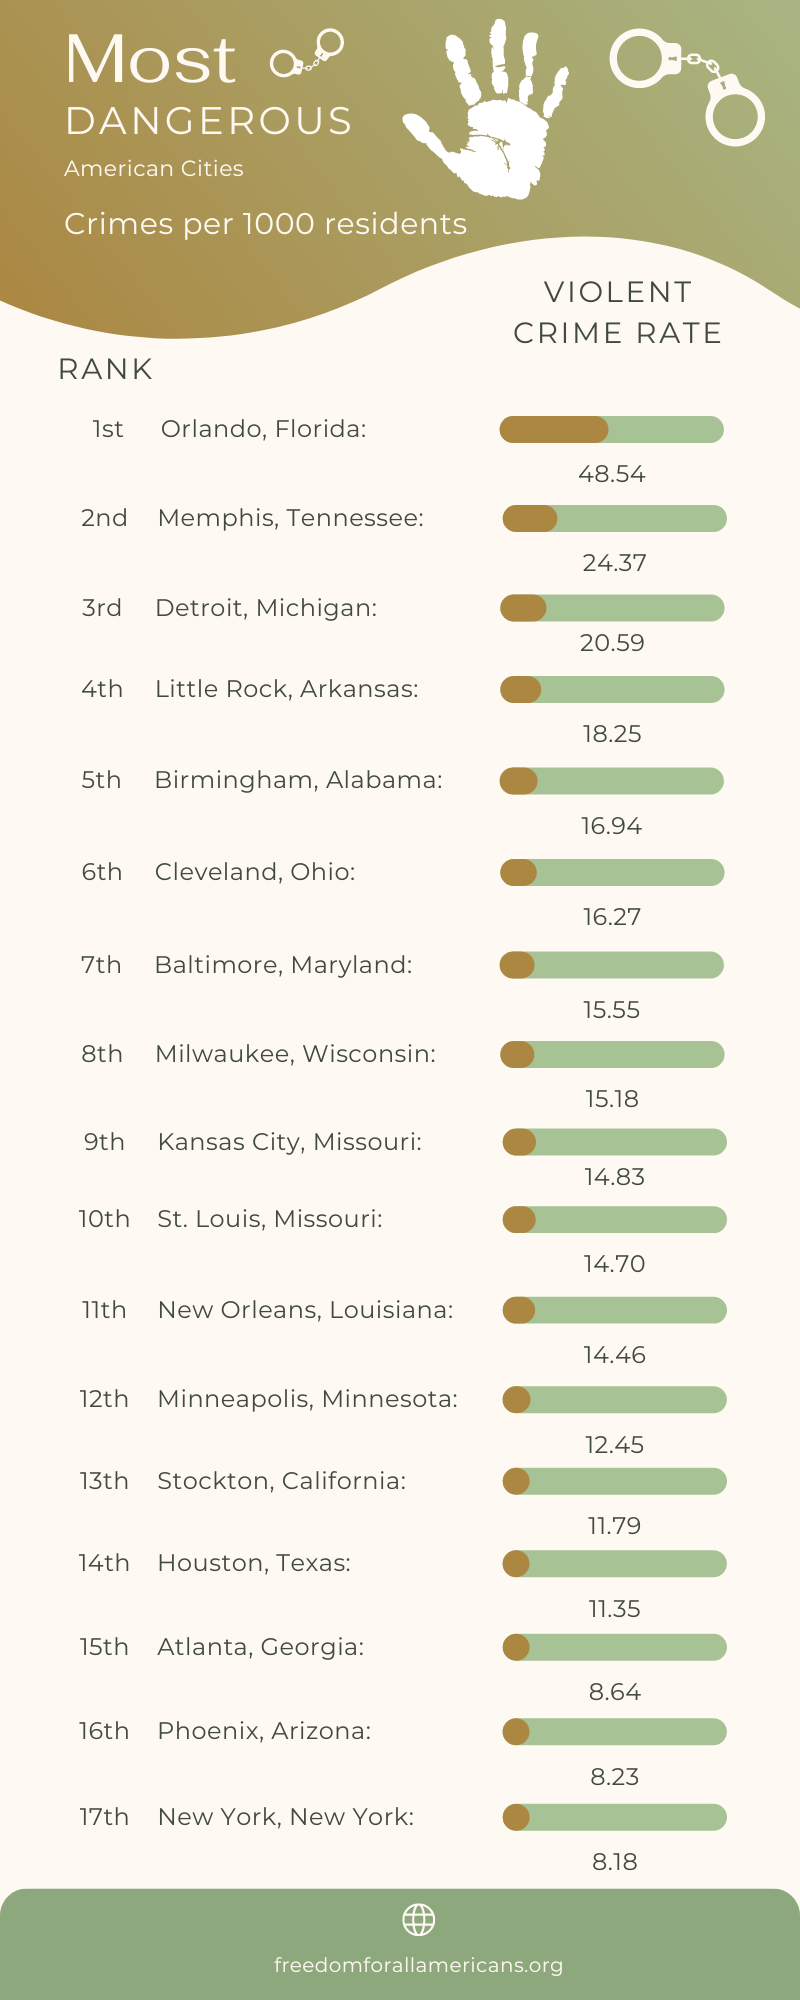 The Most Dangerous Cities in America - Violent Crimes per 1000 residents